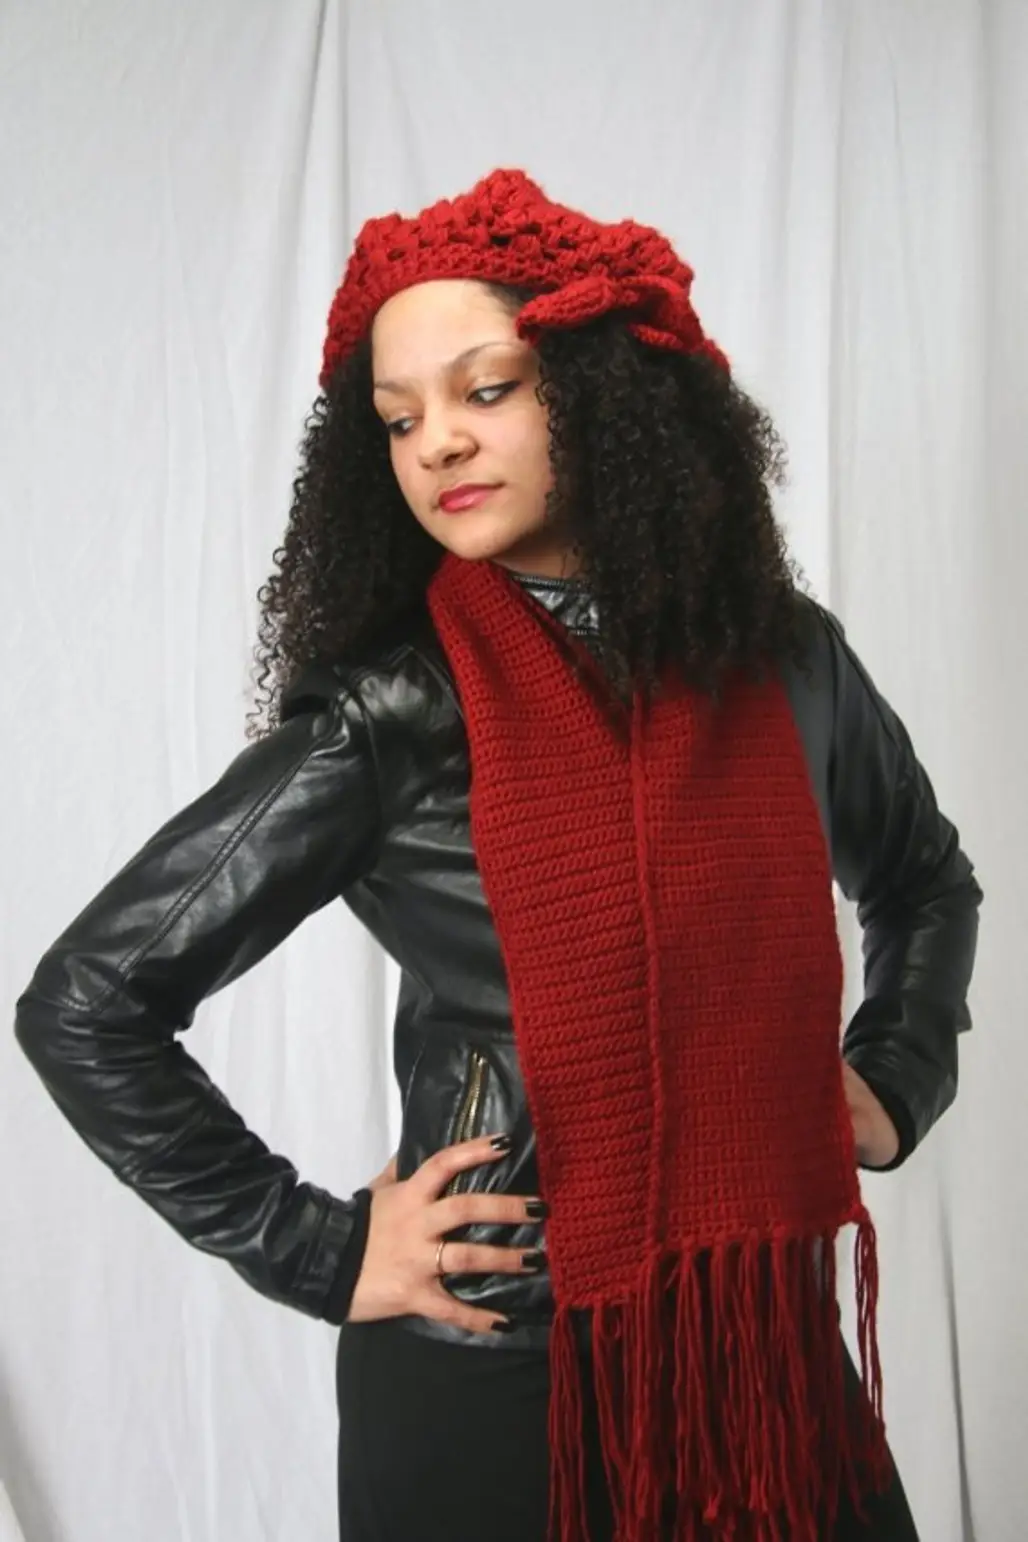 Crocheted Cloche Hat Set with Matching Fringe Scarf in Red